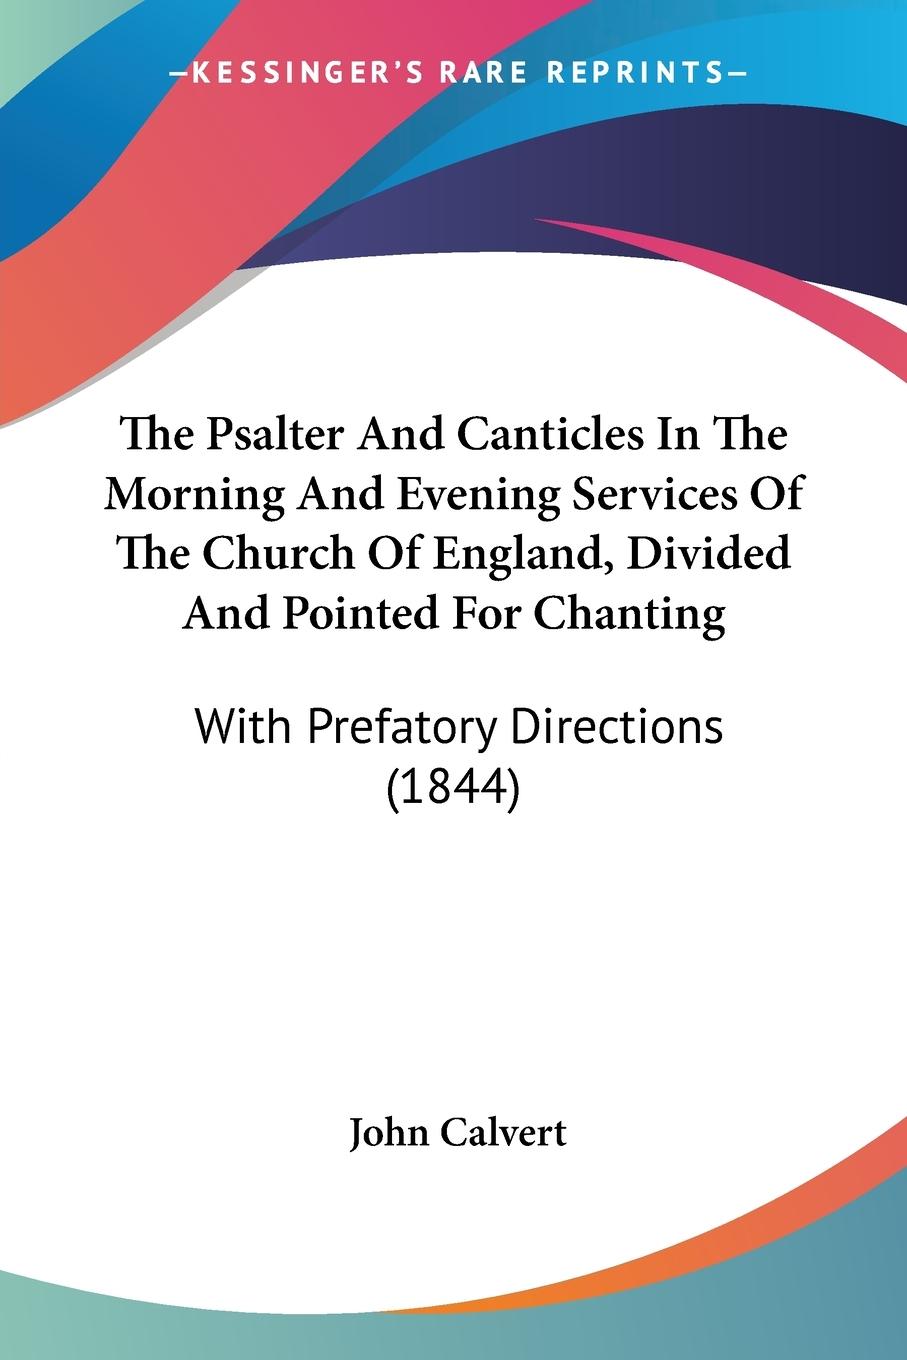 The Psalter And Canticles In The Morning And Evening Services Of The Church Of England, Divided And Pointed For Chanting - Calvert, John